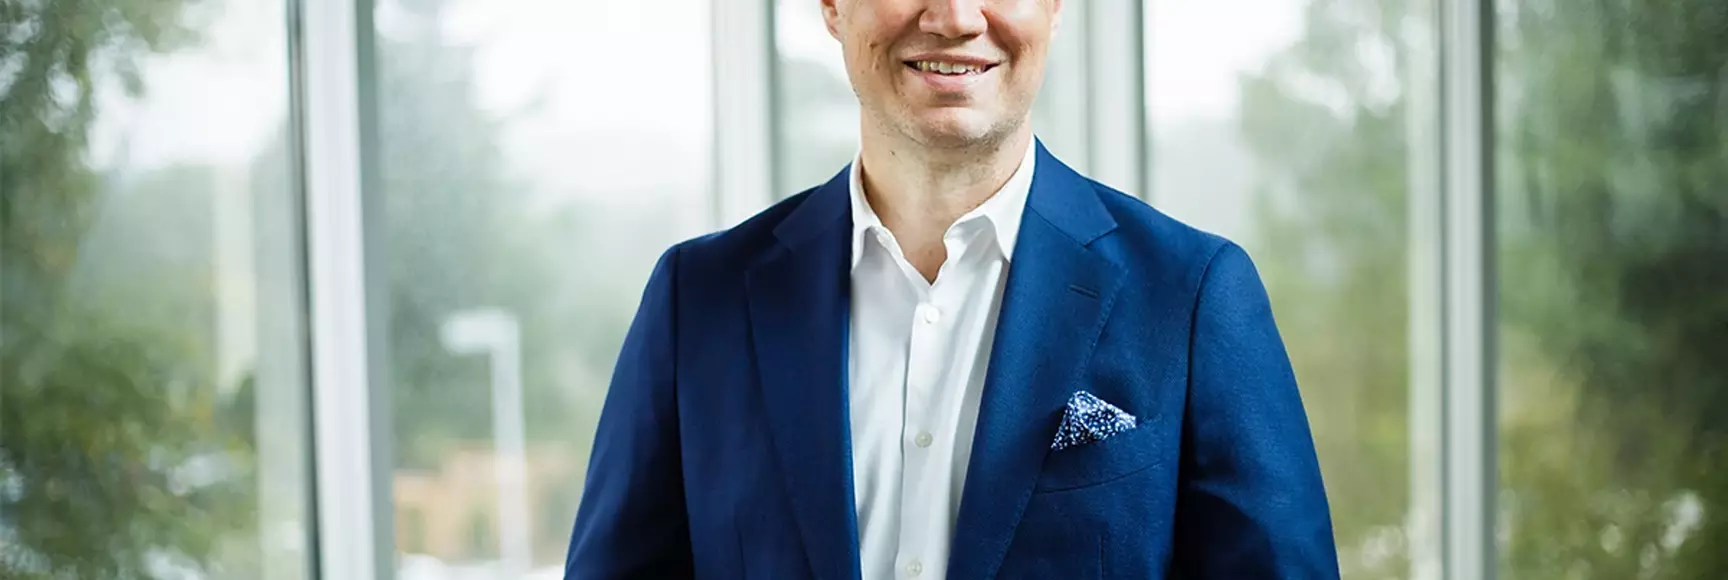 Julien Born, the new Chief Executive Officer of The LYCRA Company, a global leader in innovative fiber and textile solutions.